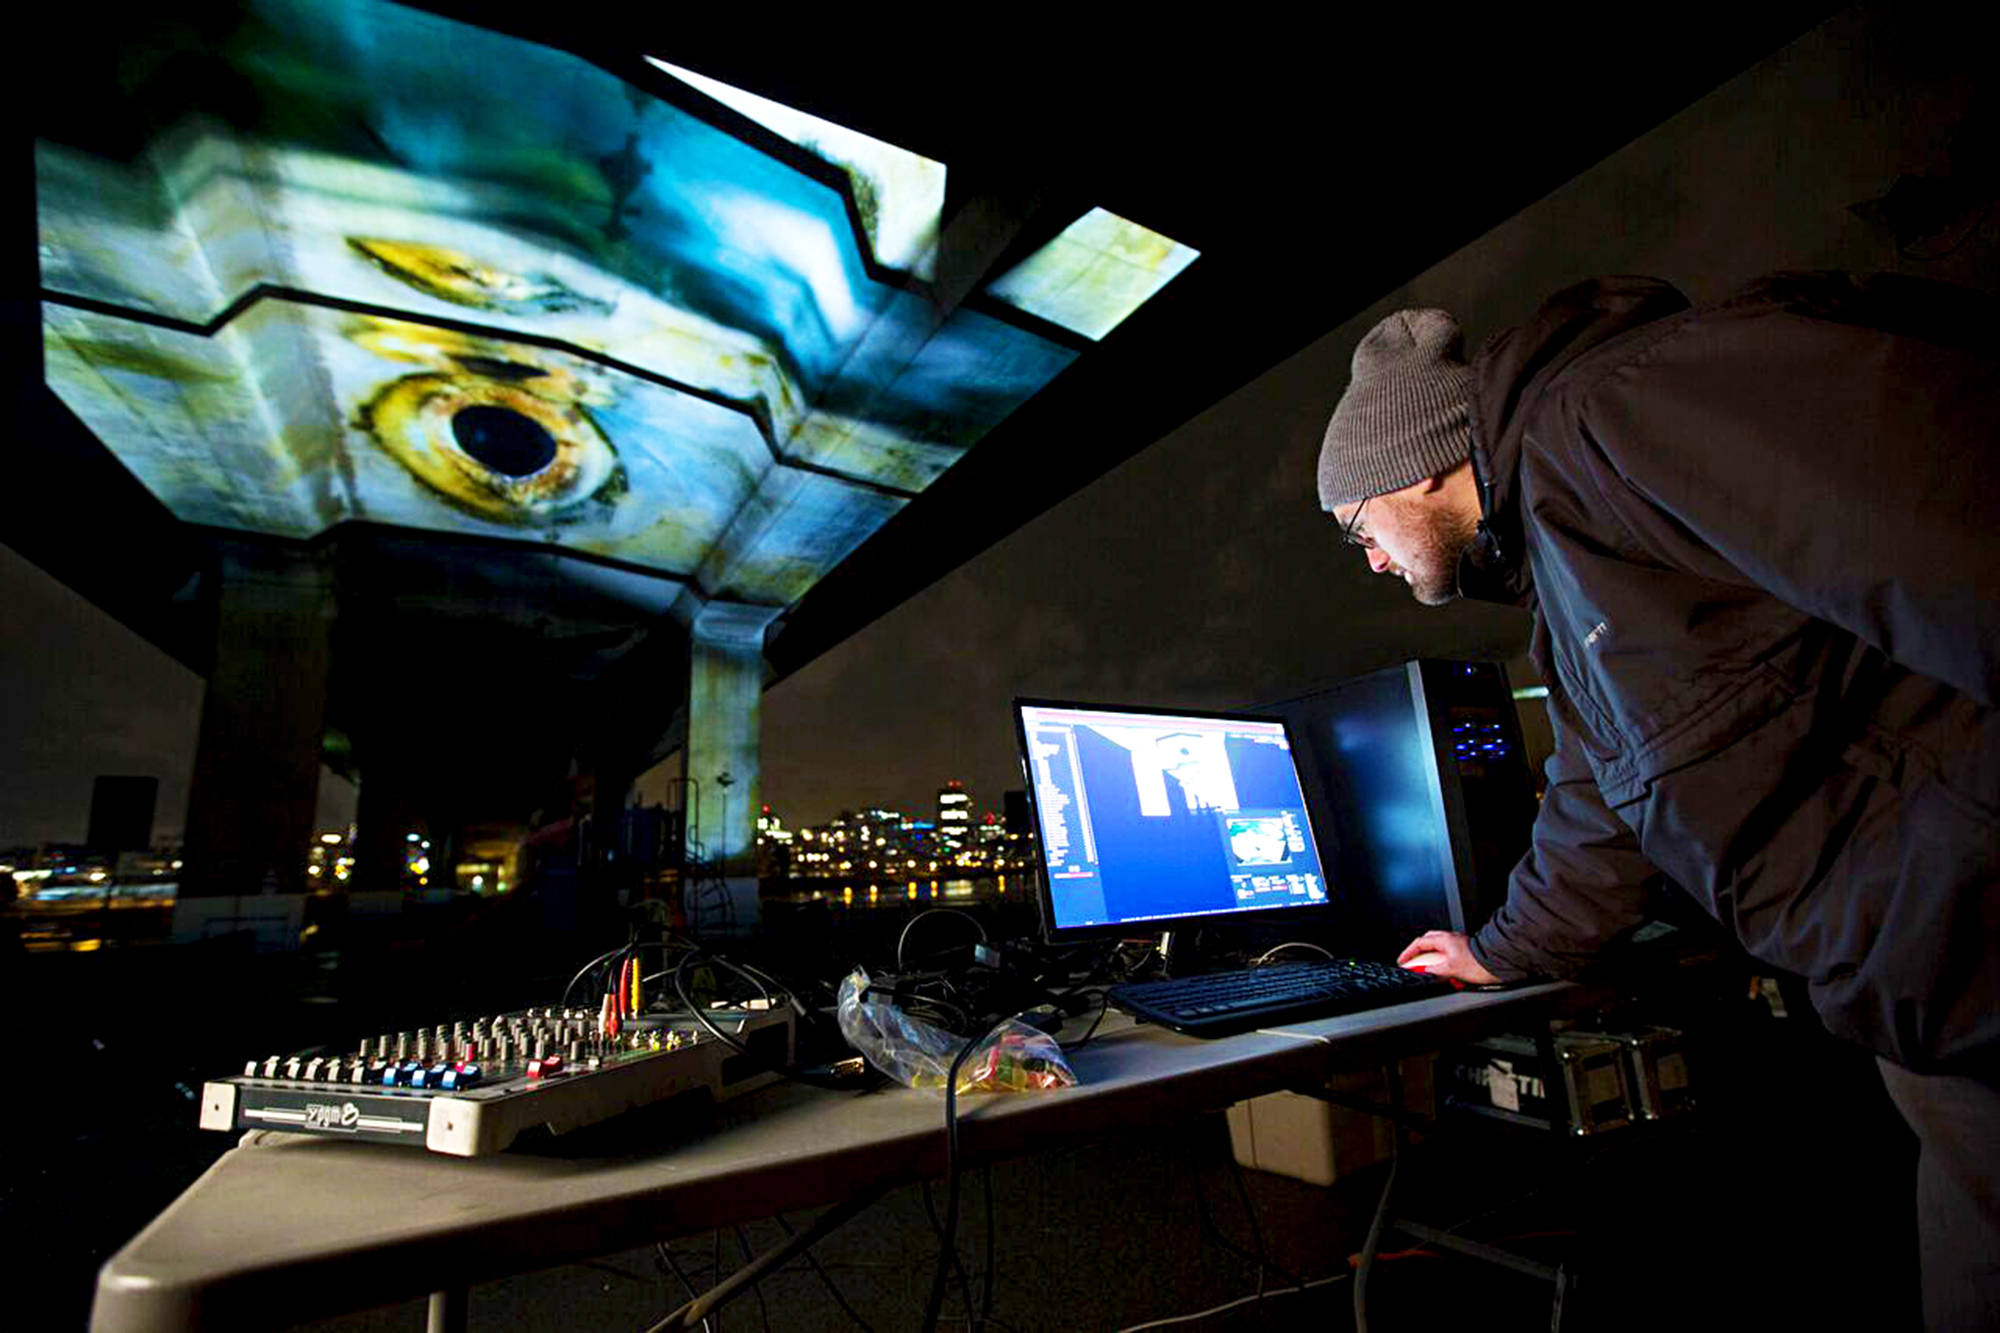 A technician works on the blend of cinematic storytelling and high-tech art installation under the Cambie Street Bridge in Vancouver.